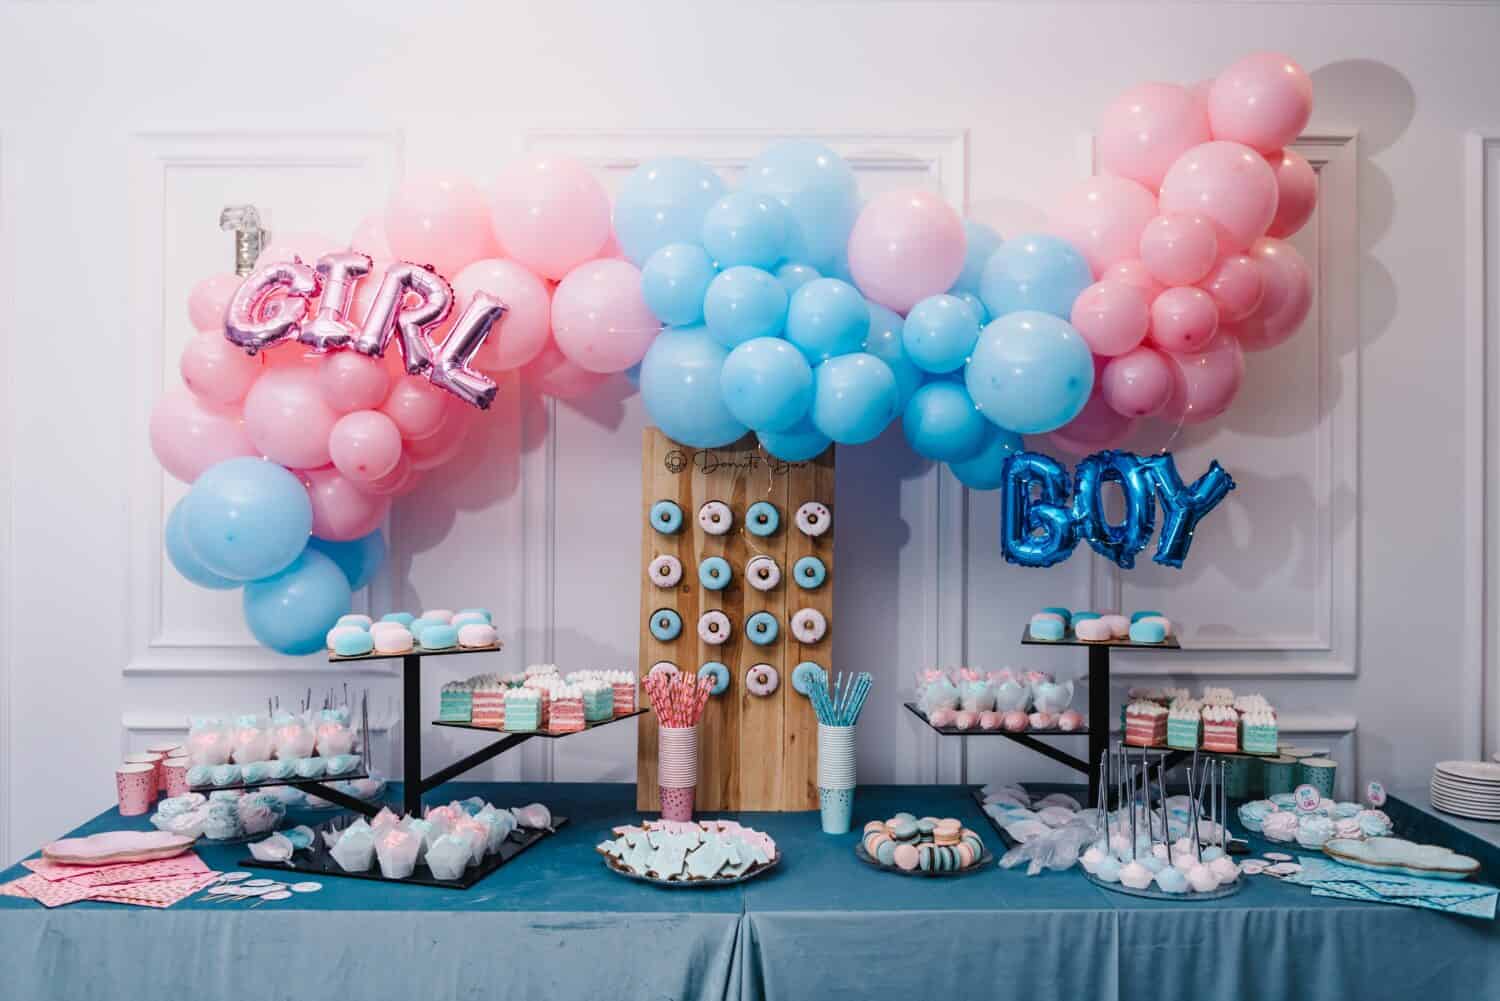 Baby Shower party decor. Delicious reception. Celebration concept. Trendy candy bar. Table with sweets, candies, dessert. Photo zone, arch with pink and blue balloons for gender party. Girl or boy.